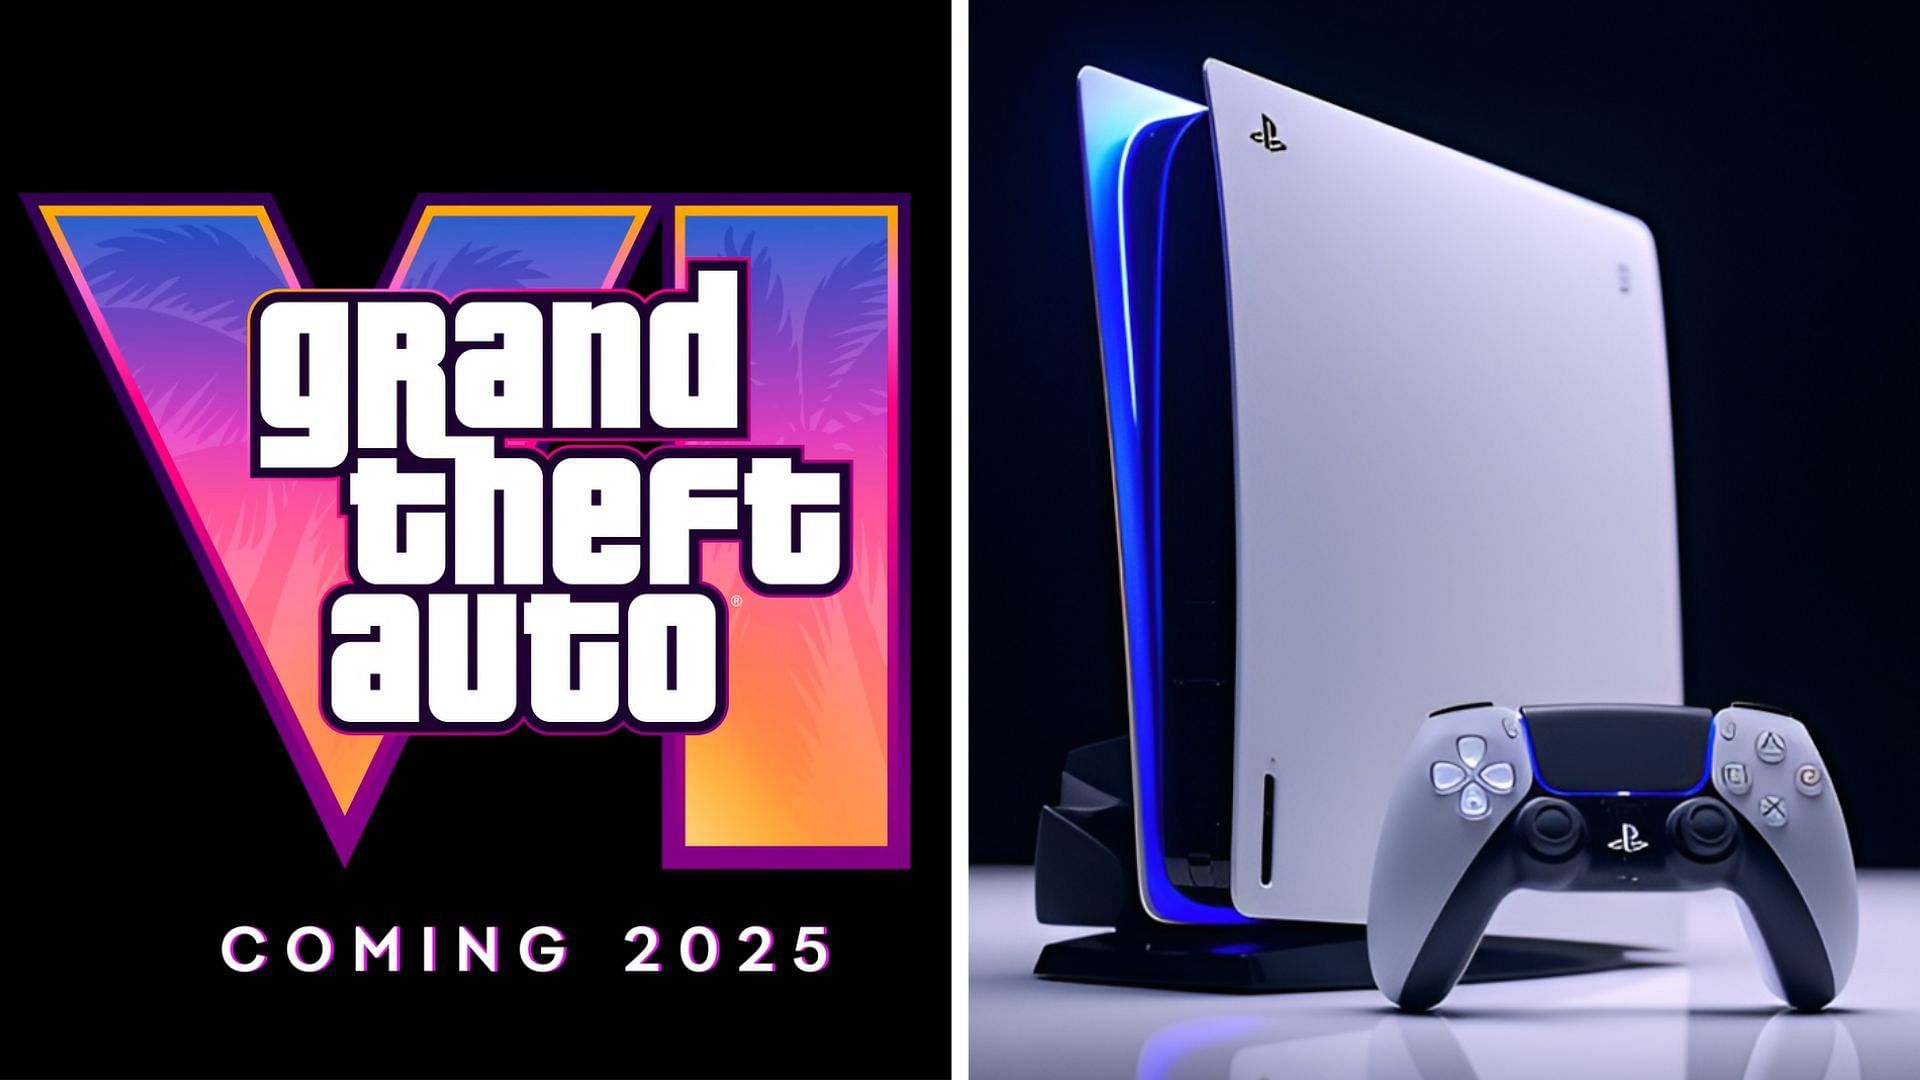 The PS5 Pro is rumored to launch alongside GTA 6 (Image via Rockstar Games and Mixed Reality News)